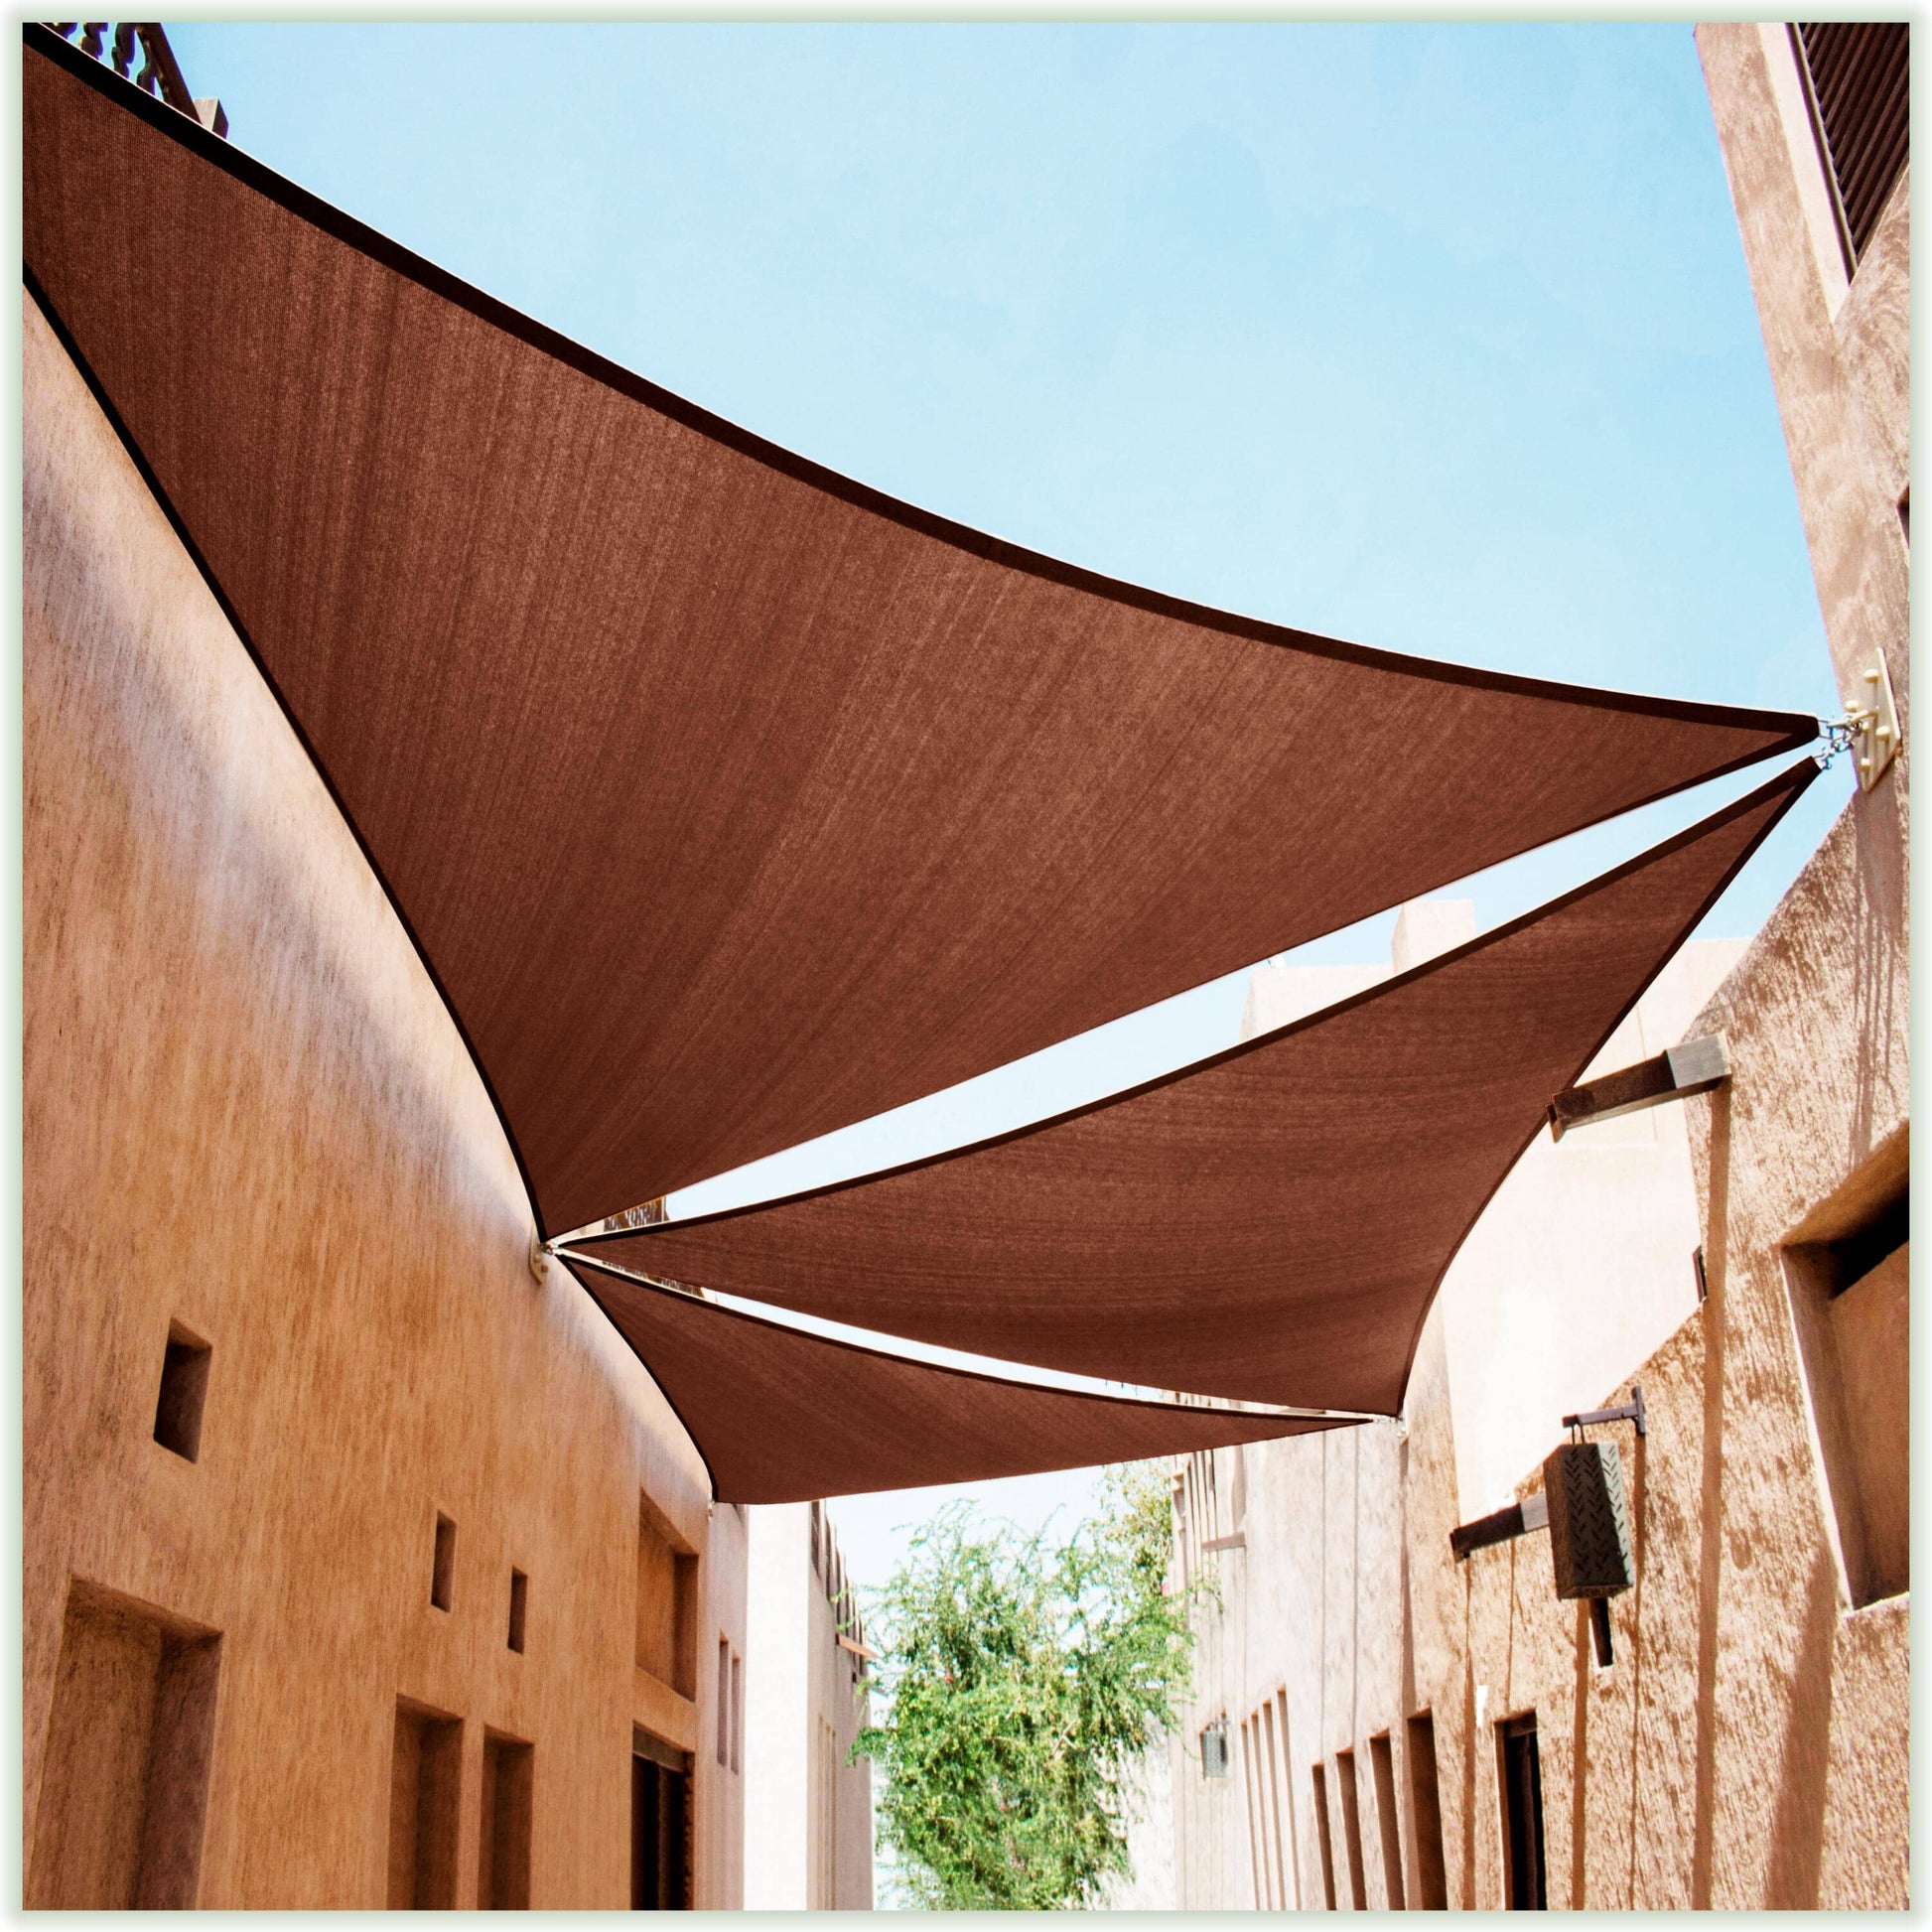 Equilateral Triangle Sun Shade Sail Canopy, Commercial Grade, 11 Sizes, 8 Colors Sun Shade Sail Colourtree 32' x 32' x 32' Brown 